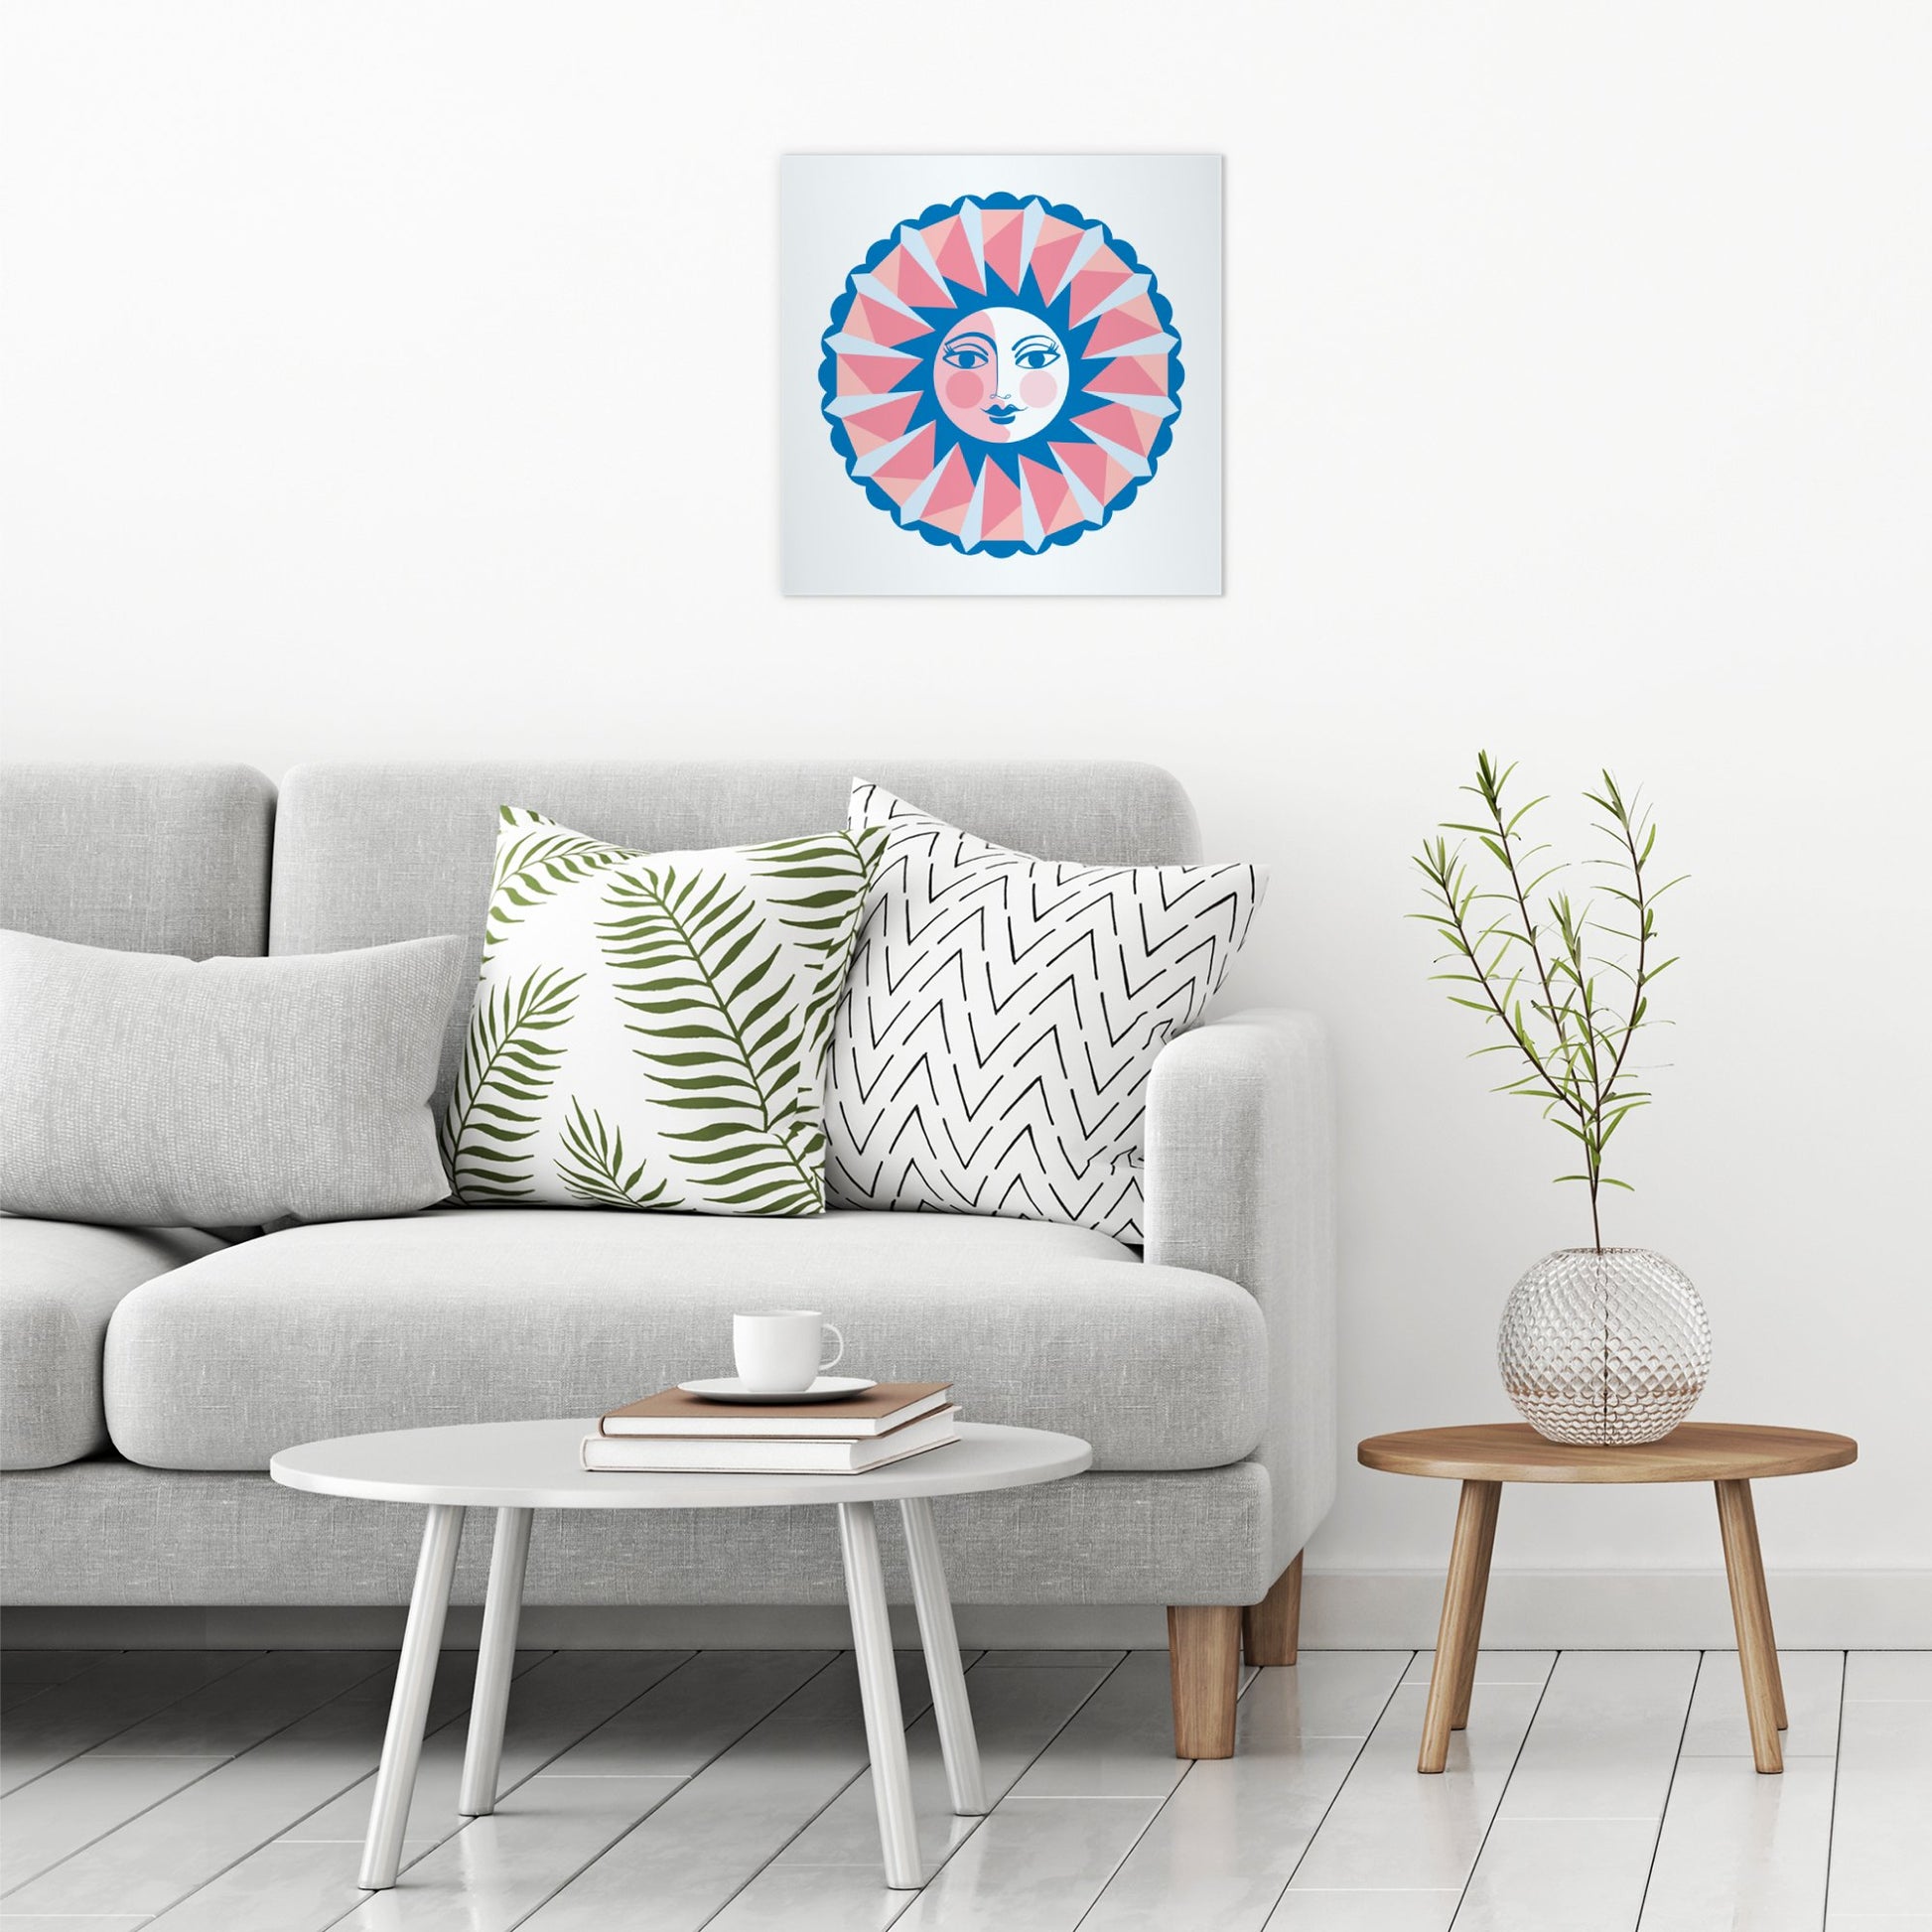 A contemporary modern room view showing a large size metal art poster display plate with printed design of a Sun Face Design